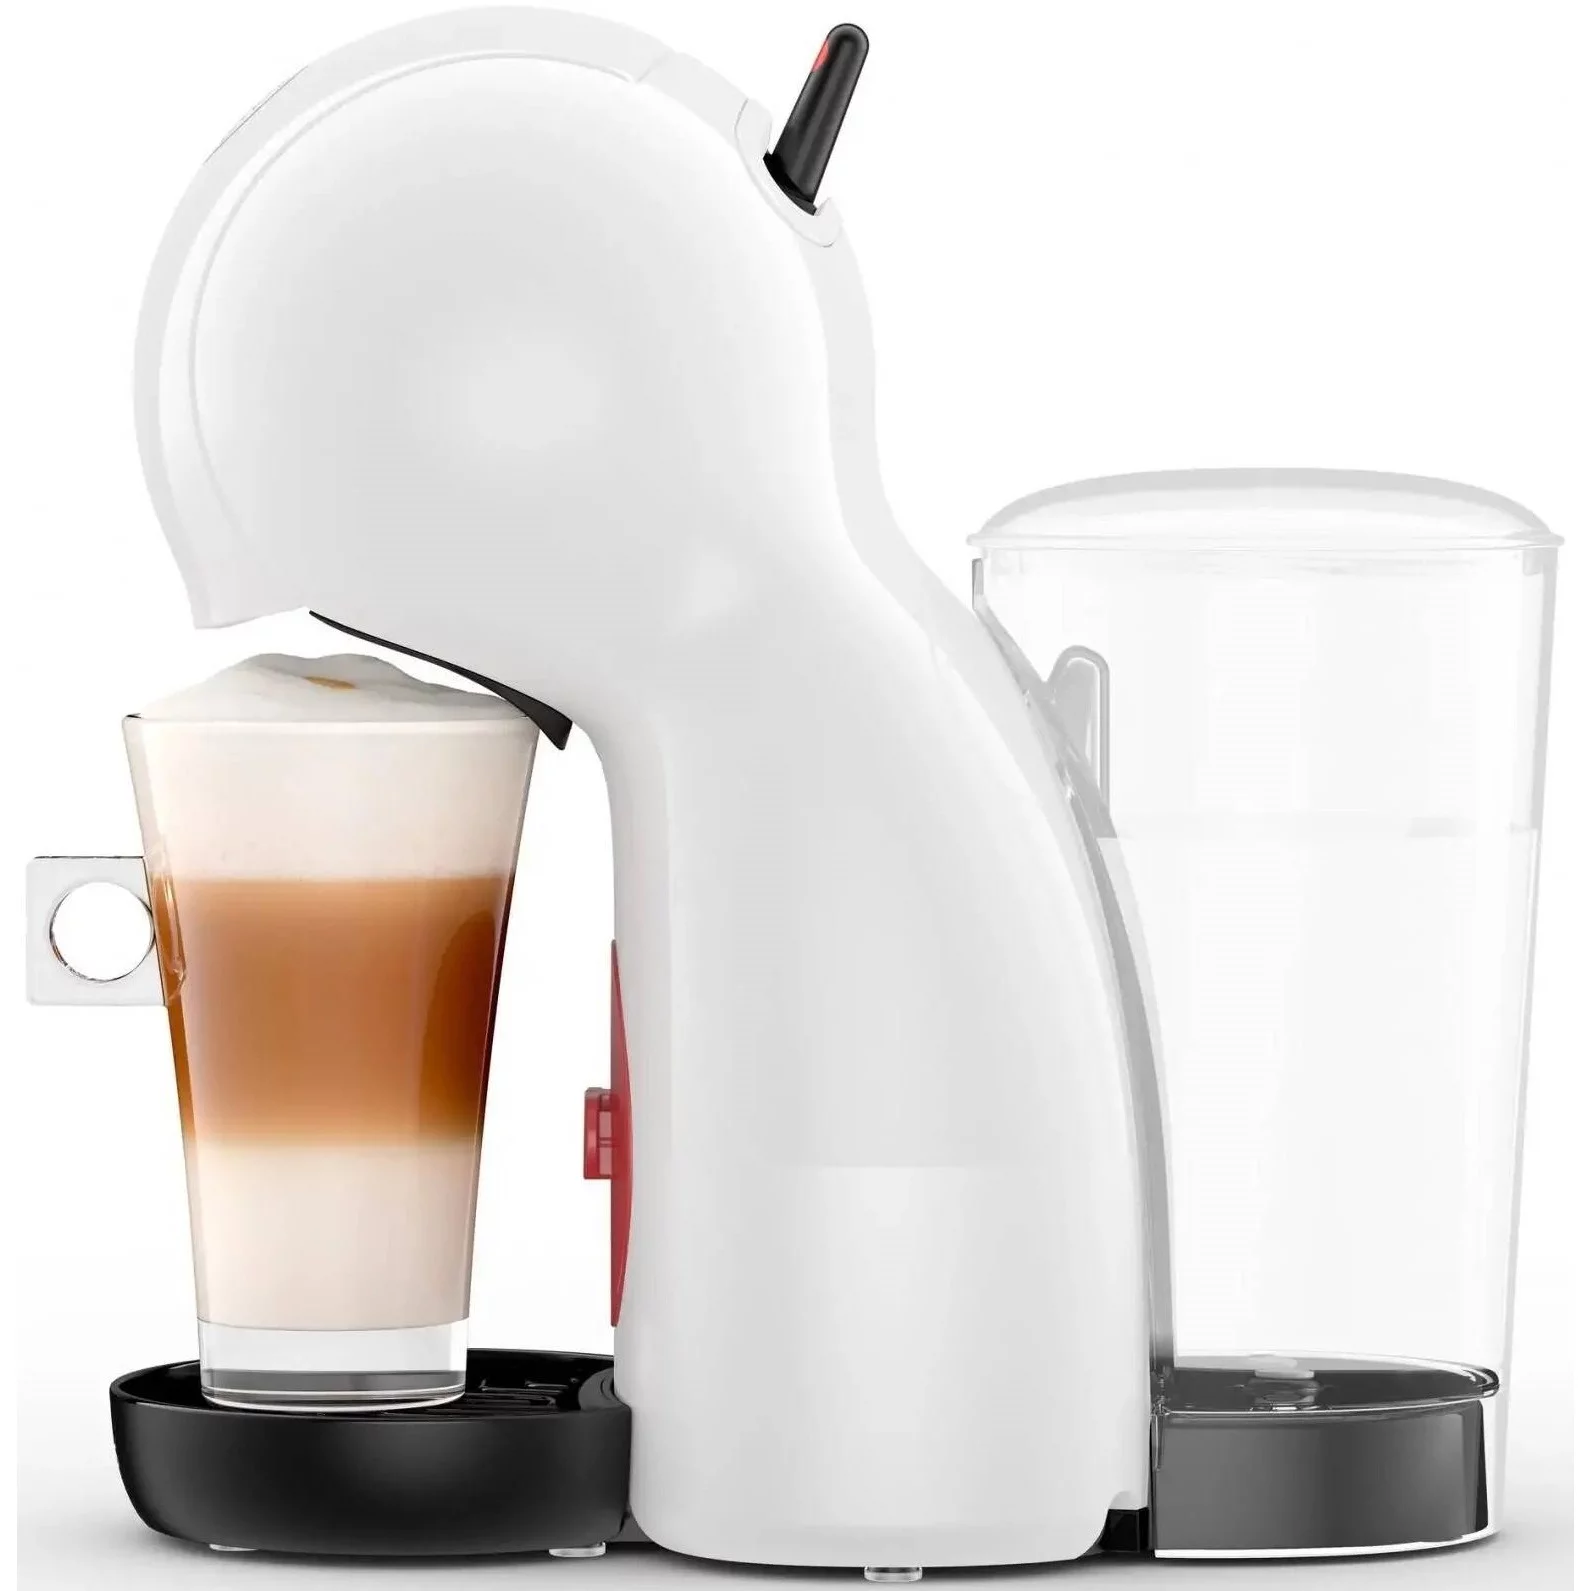 Dolce gusto krups xs. Капсульная кофеварка Krups Dolce gusto. Krups Nescafe Dolce gusto piccolo XS kp1a0110. Кофемашина капсульная Krups kp1a01/kp1a05/kp1a08/kp1a3b10 Dolce gusto piccolo XS. Кофемашина капсульная Krups Dolce gusto Ariel kp1a0110 1600 Вт.